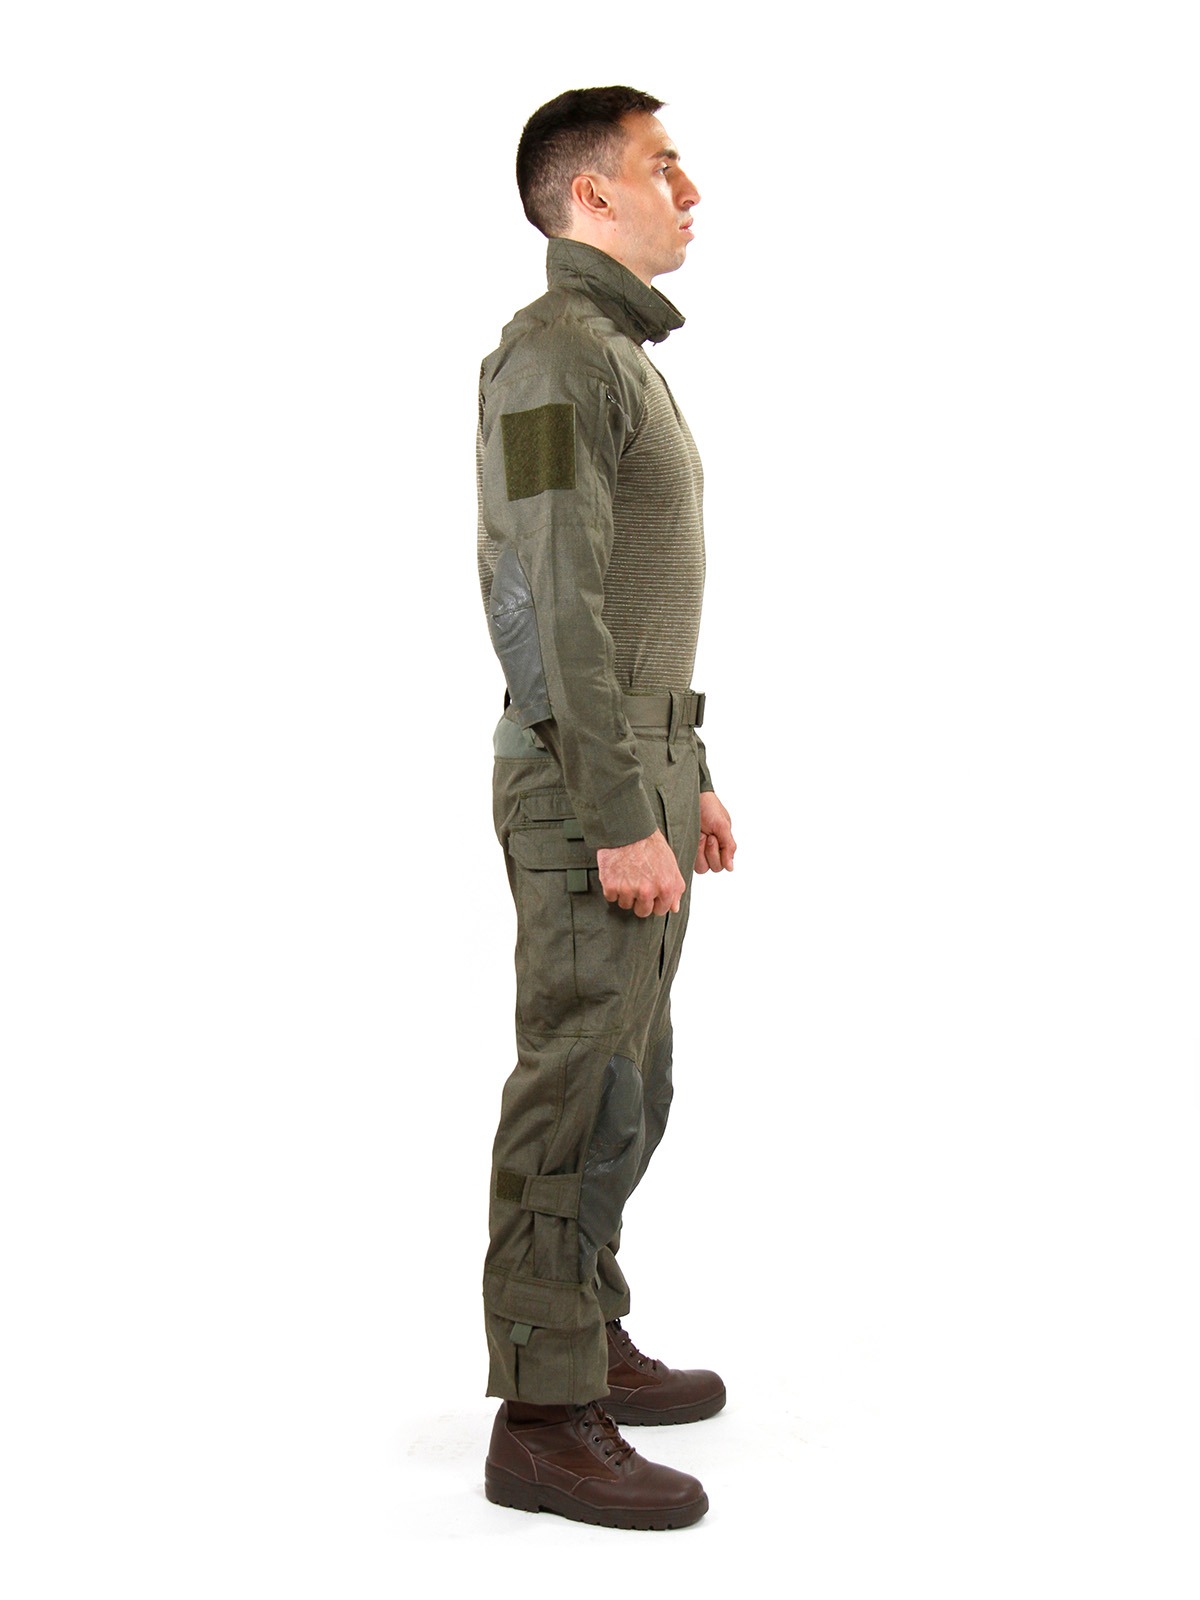 SOURCE Duratec Advanced Combat Clothing System (ACCS) - Source